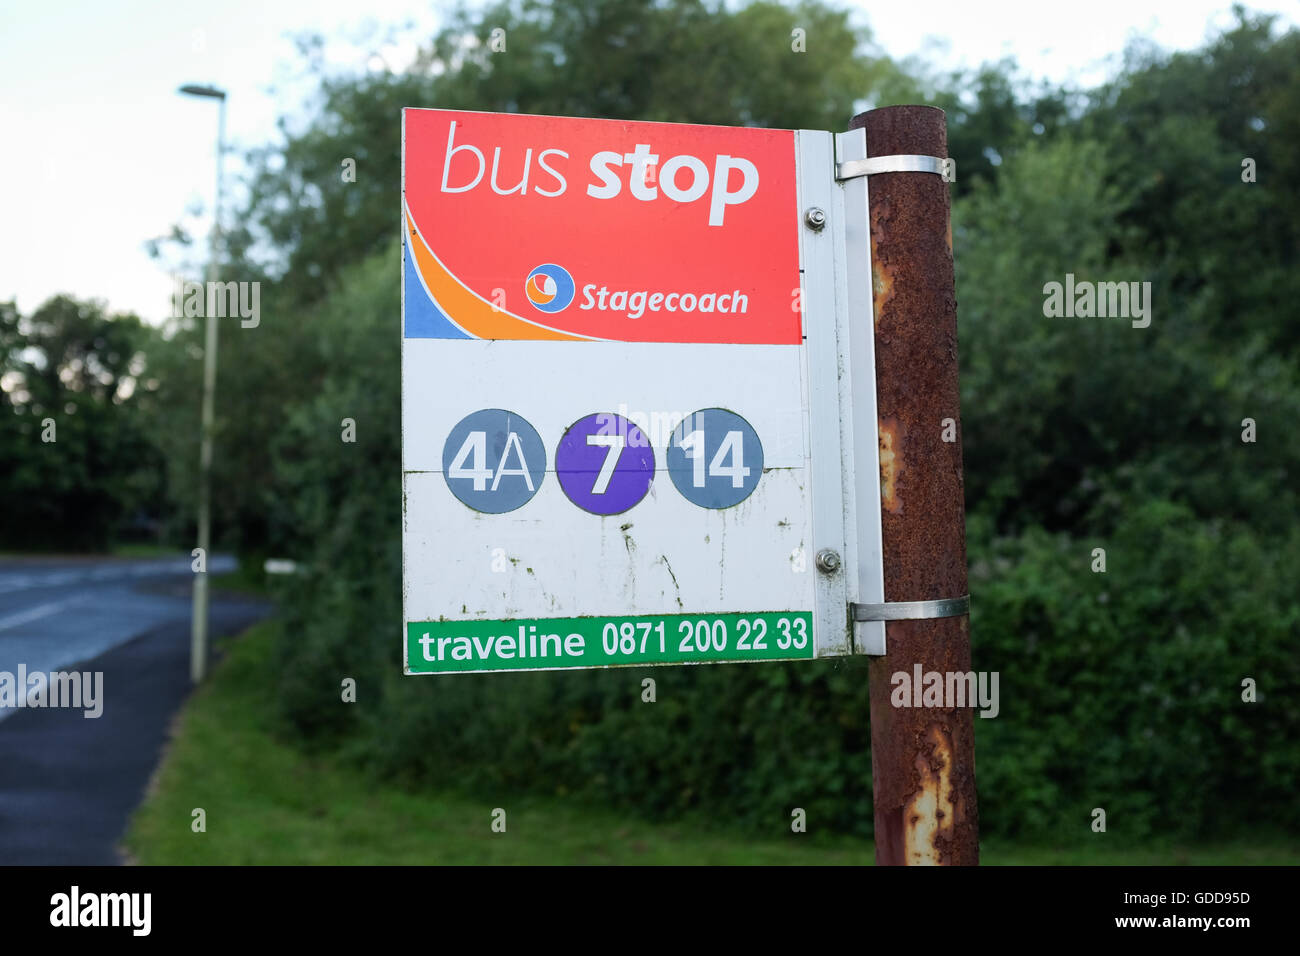 A 'bus stop' sign in England. Stock Photo